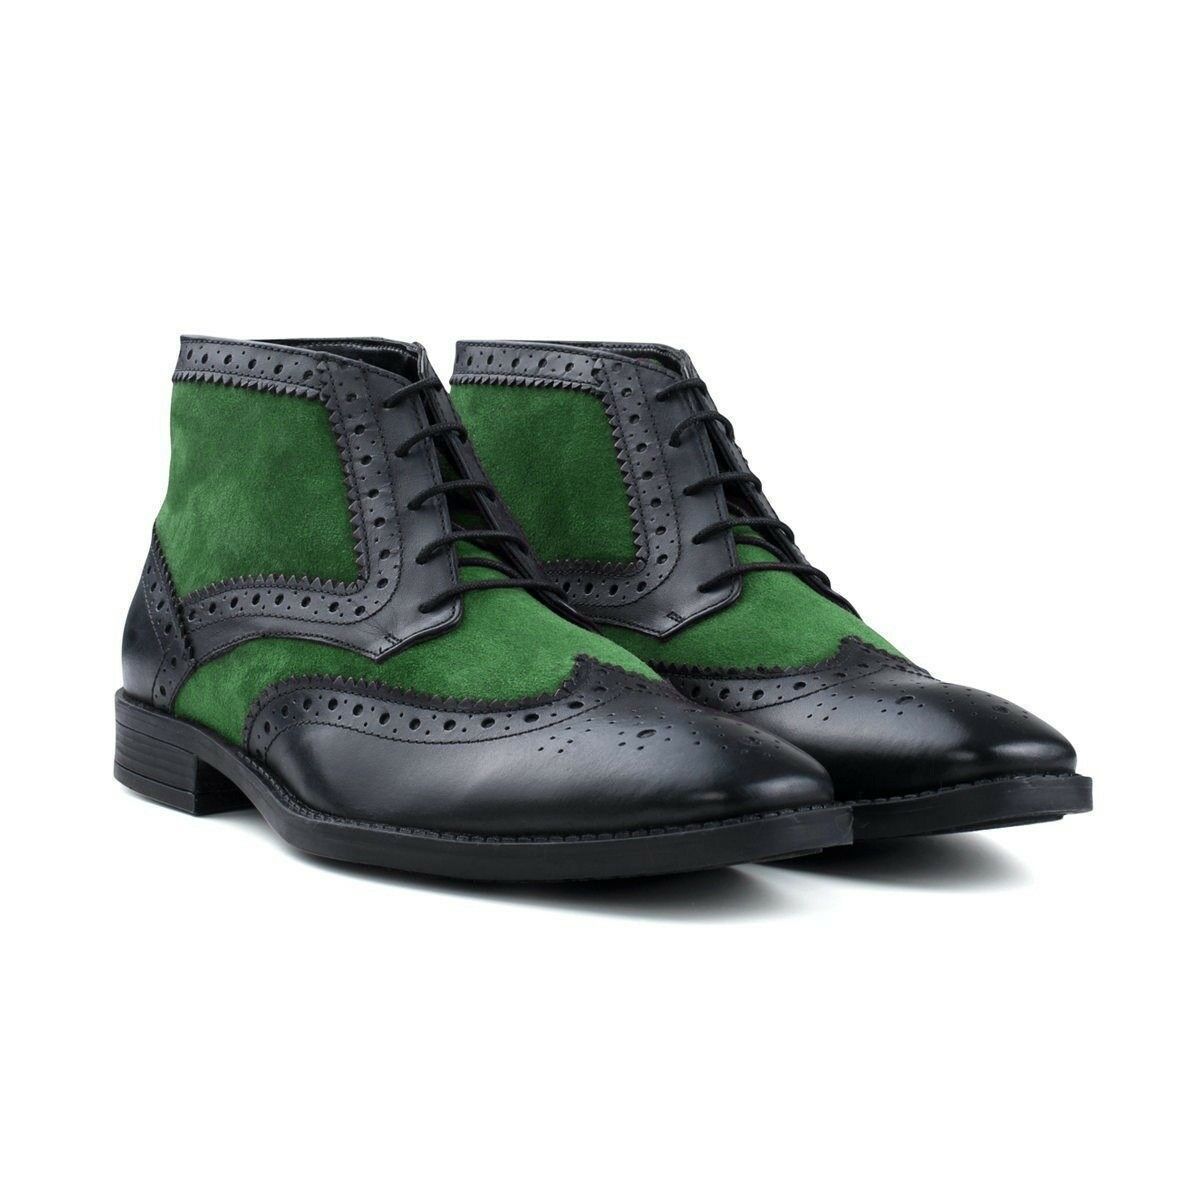 Men Black Green Brogue Toe Wing Tip Tweed Suede Leather High Ankle Boots US 7-16